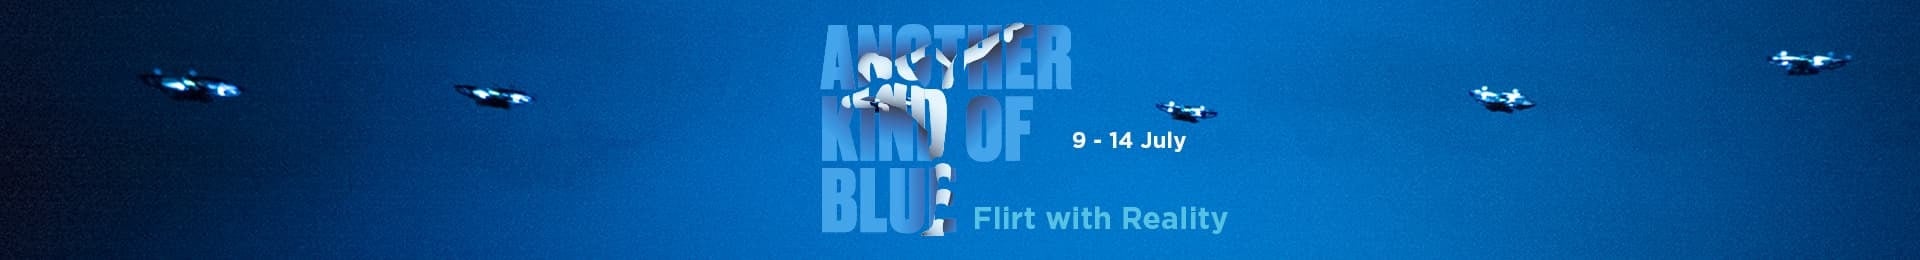 Another Kind of Blue: Flirt with Reality banner image